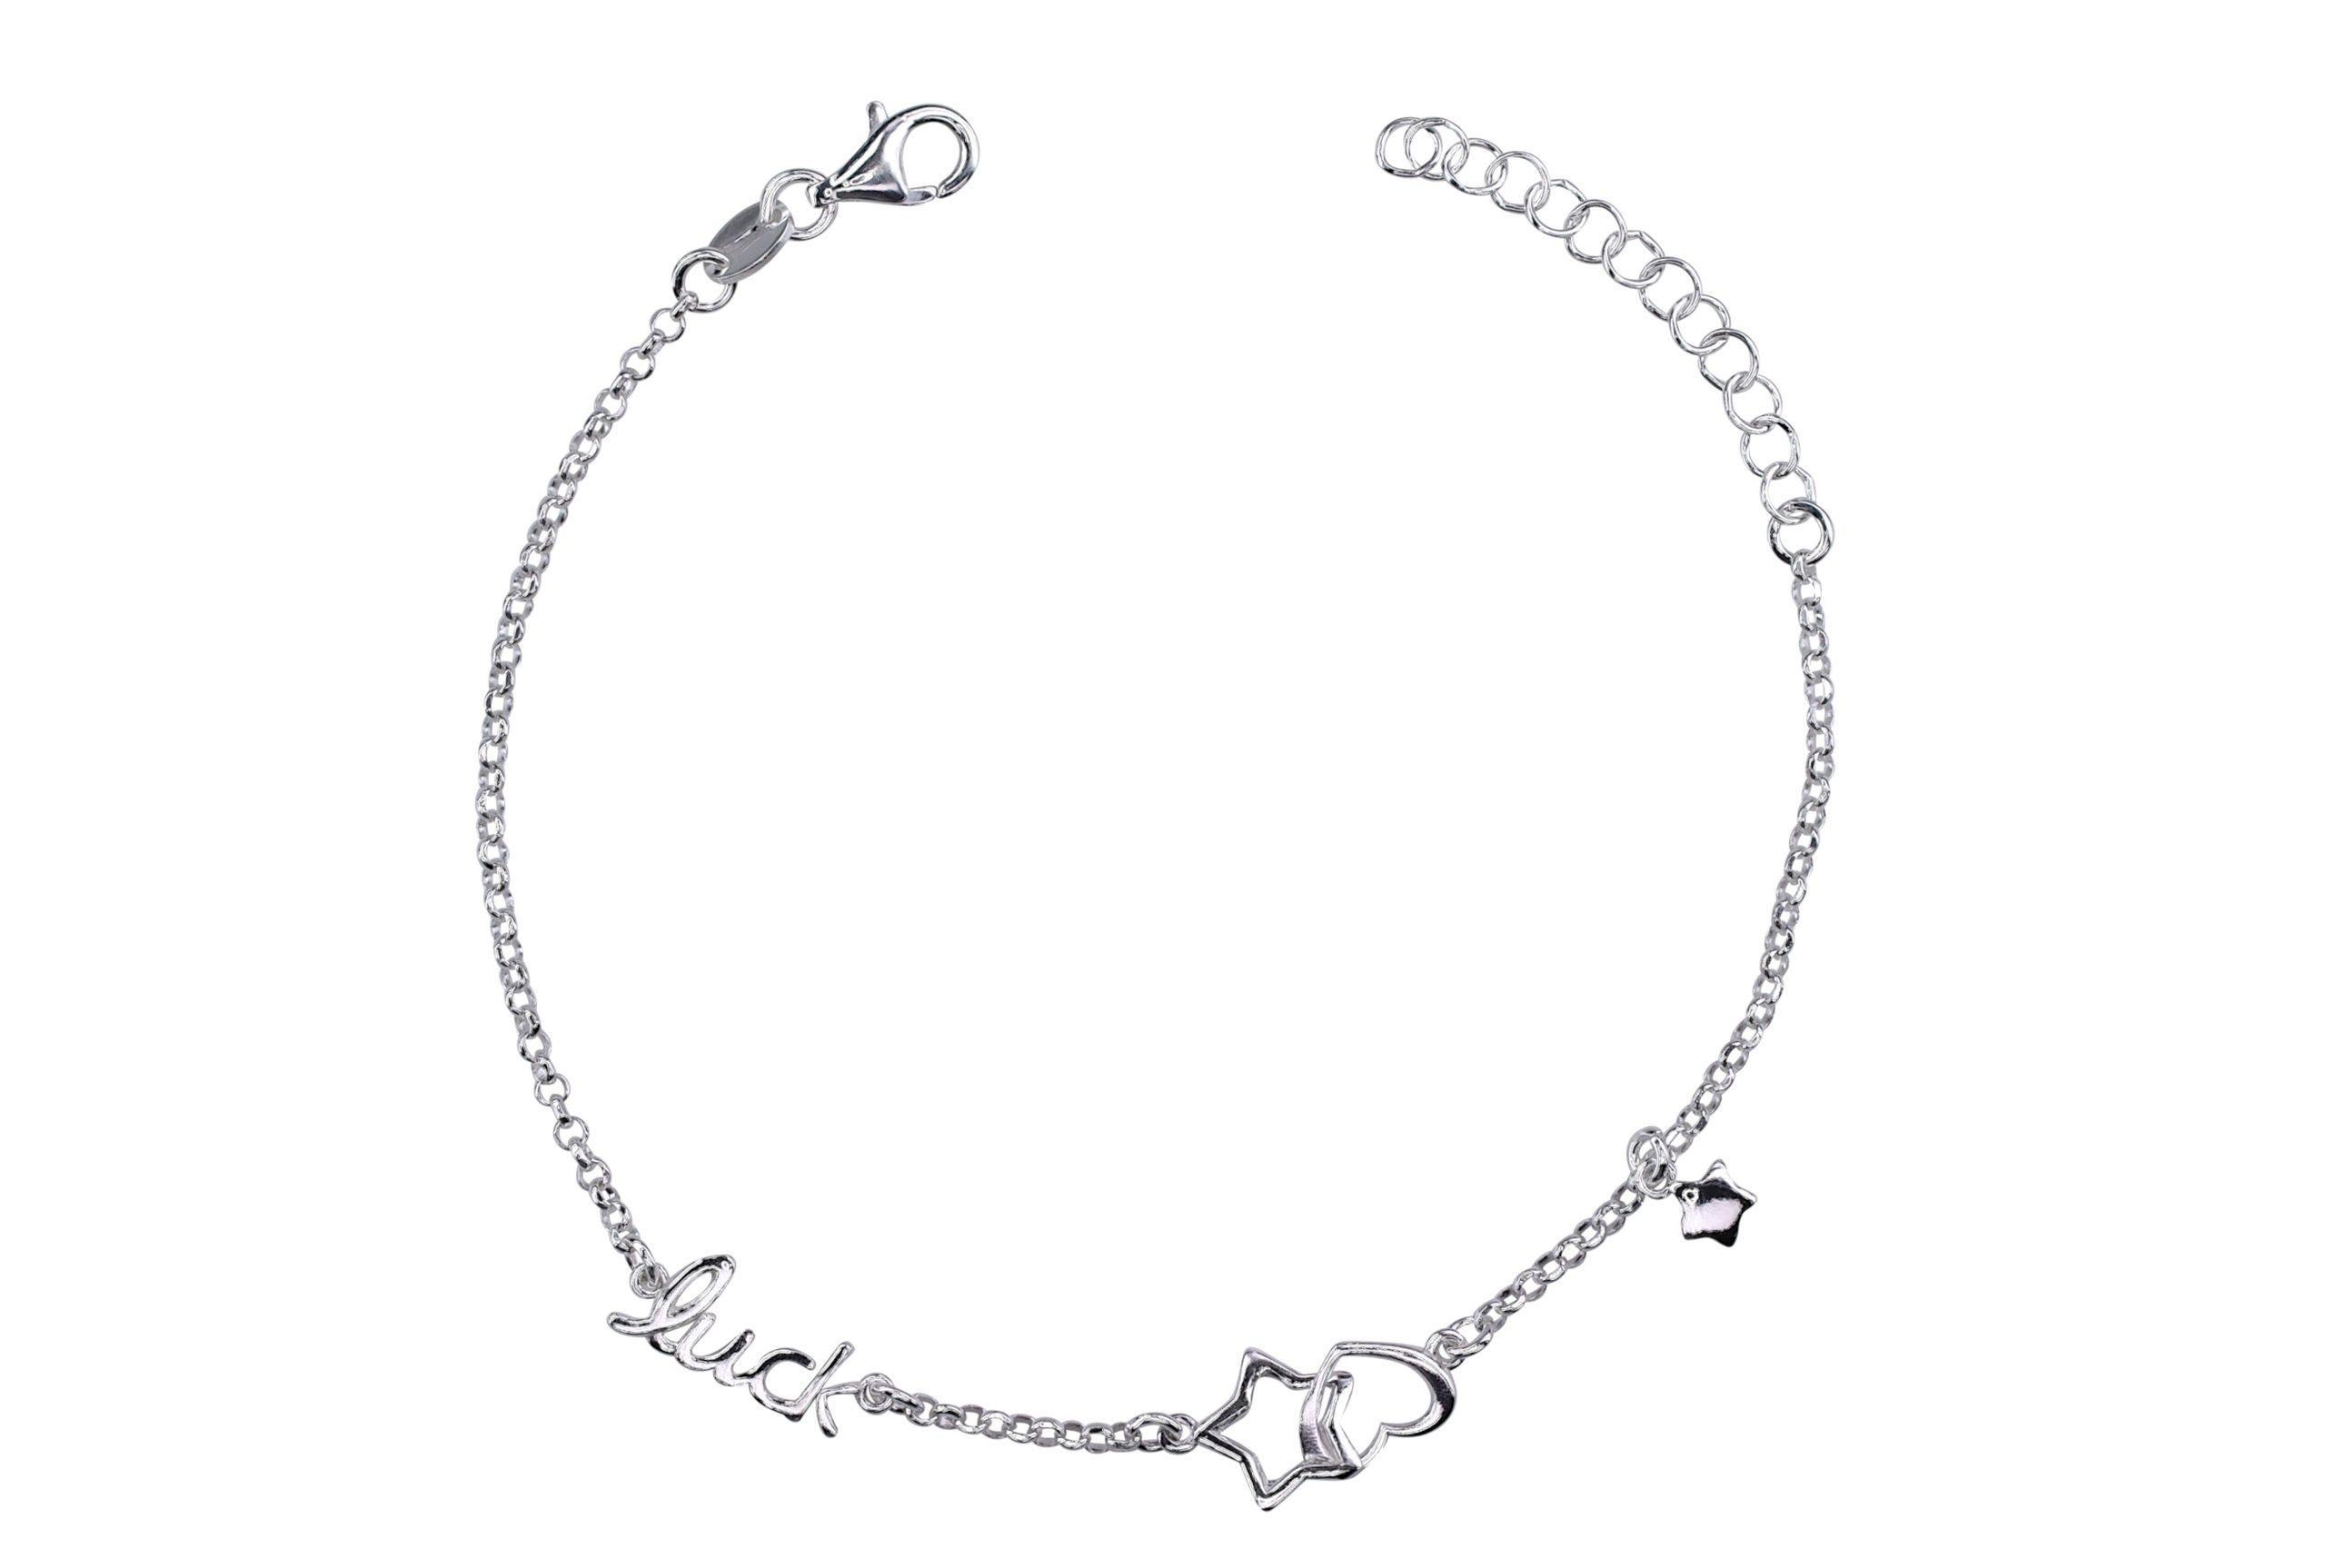 SILBERMOOS Silberarmband Statement-Armband Luck, 925 Sterling Silber